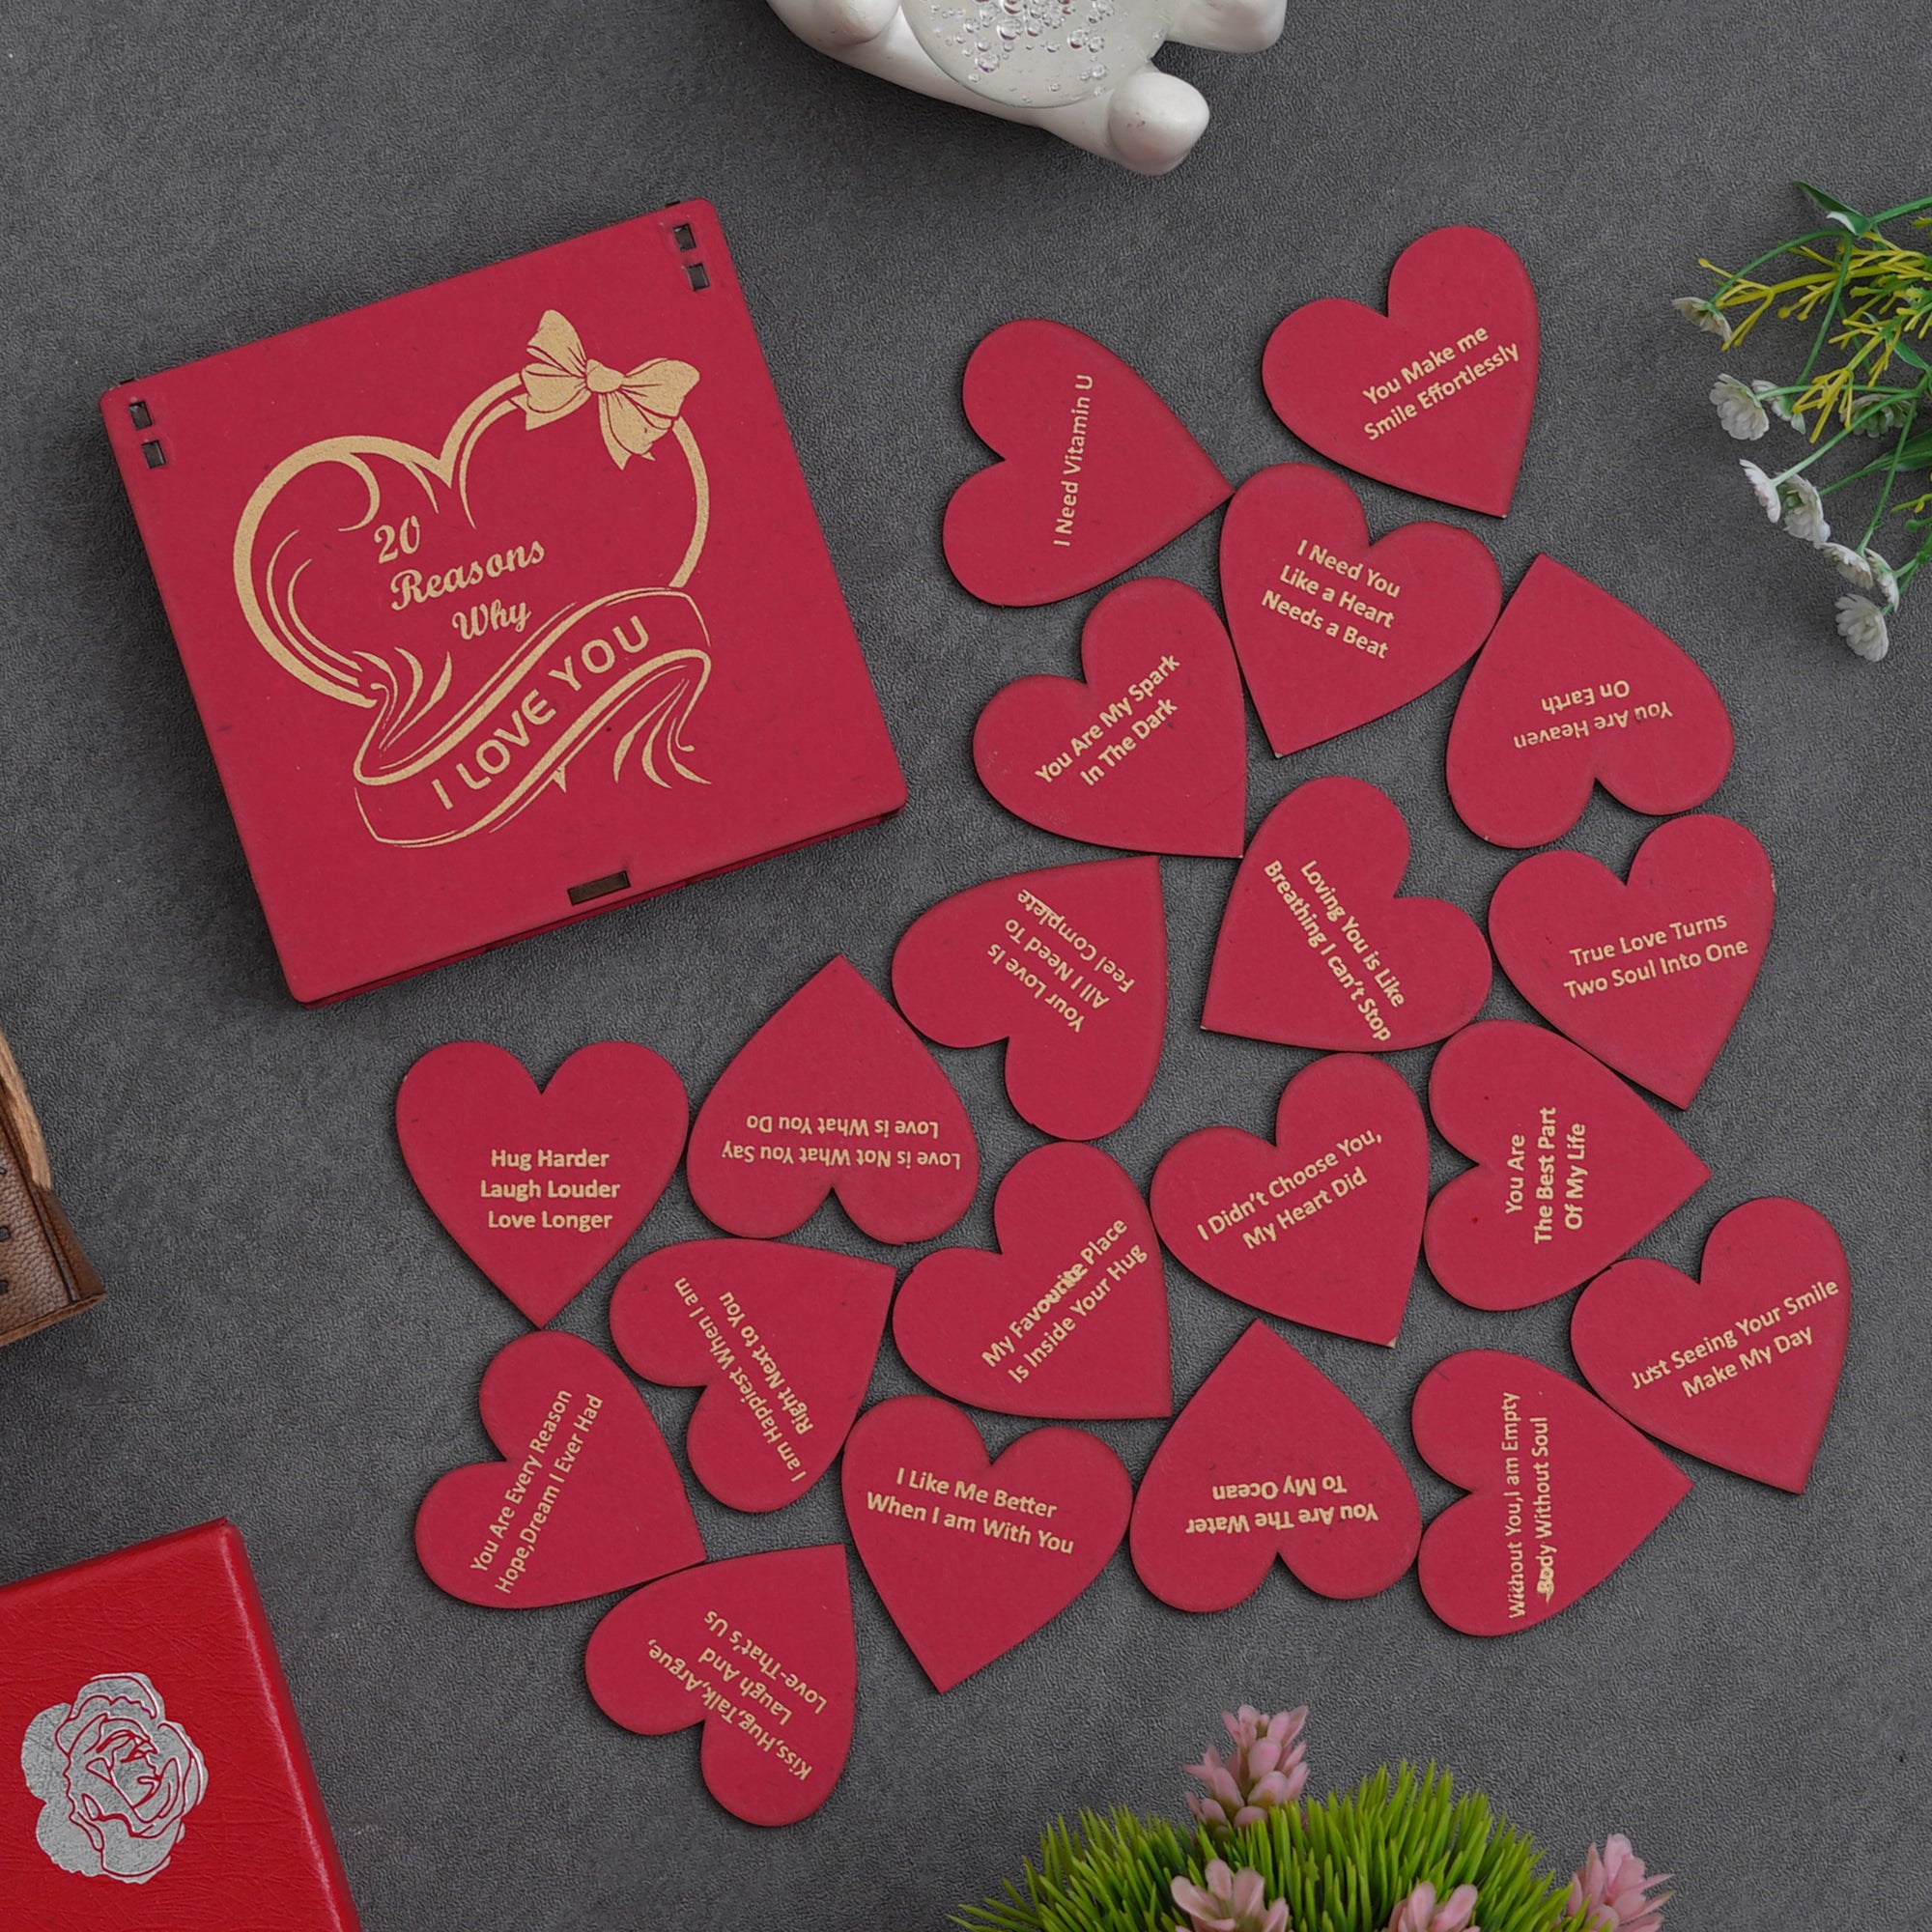 Valentine Combo of Set of 8 Love Post Cards Gift Cards Set, Red Gift Box with Teddy & Roses, "20 Reasons Why I Love You" Printed on Little Red Hearts Decorative Wooden Gift Set Box 5